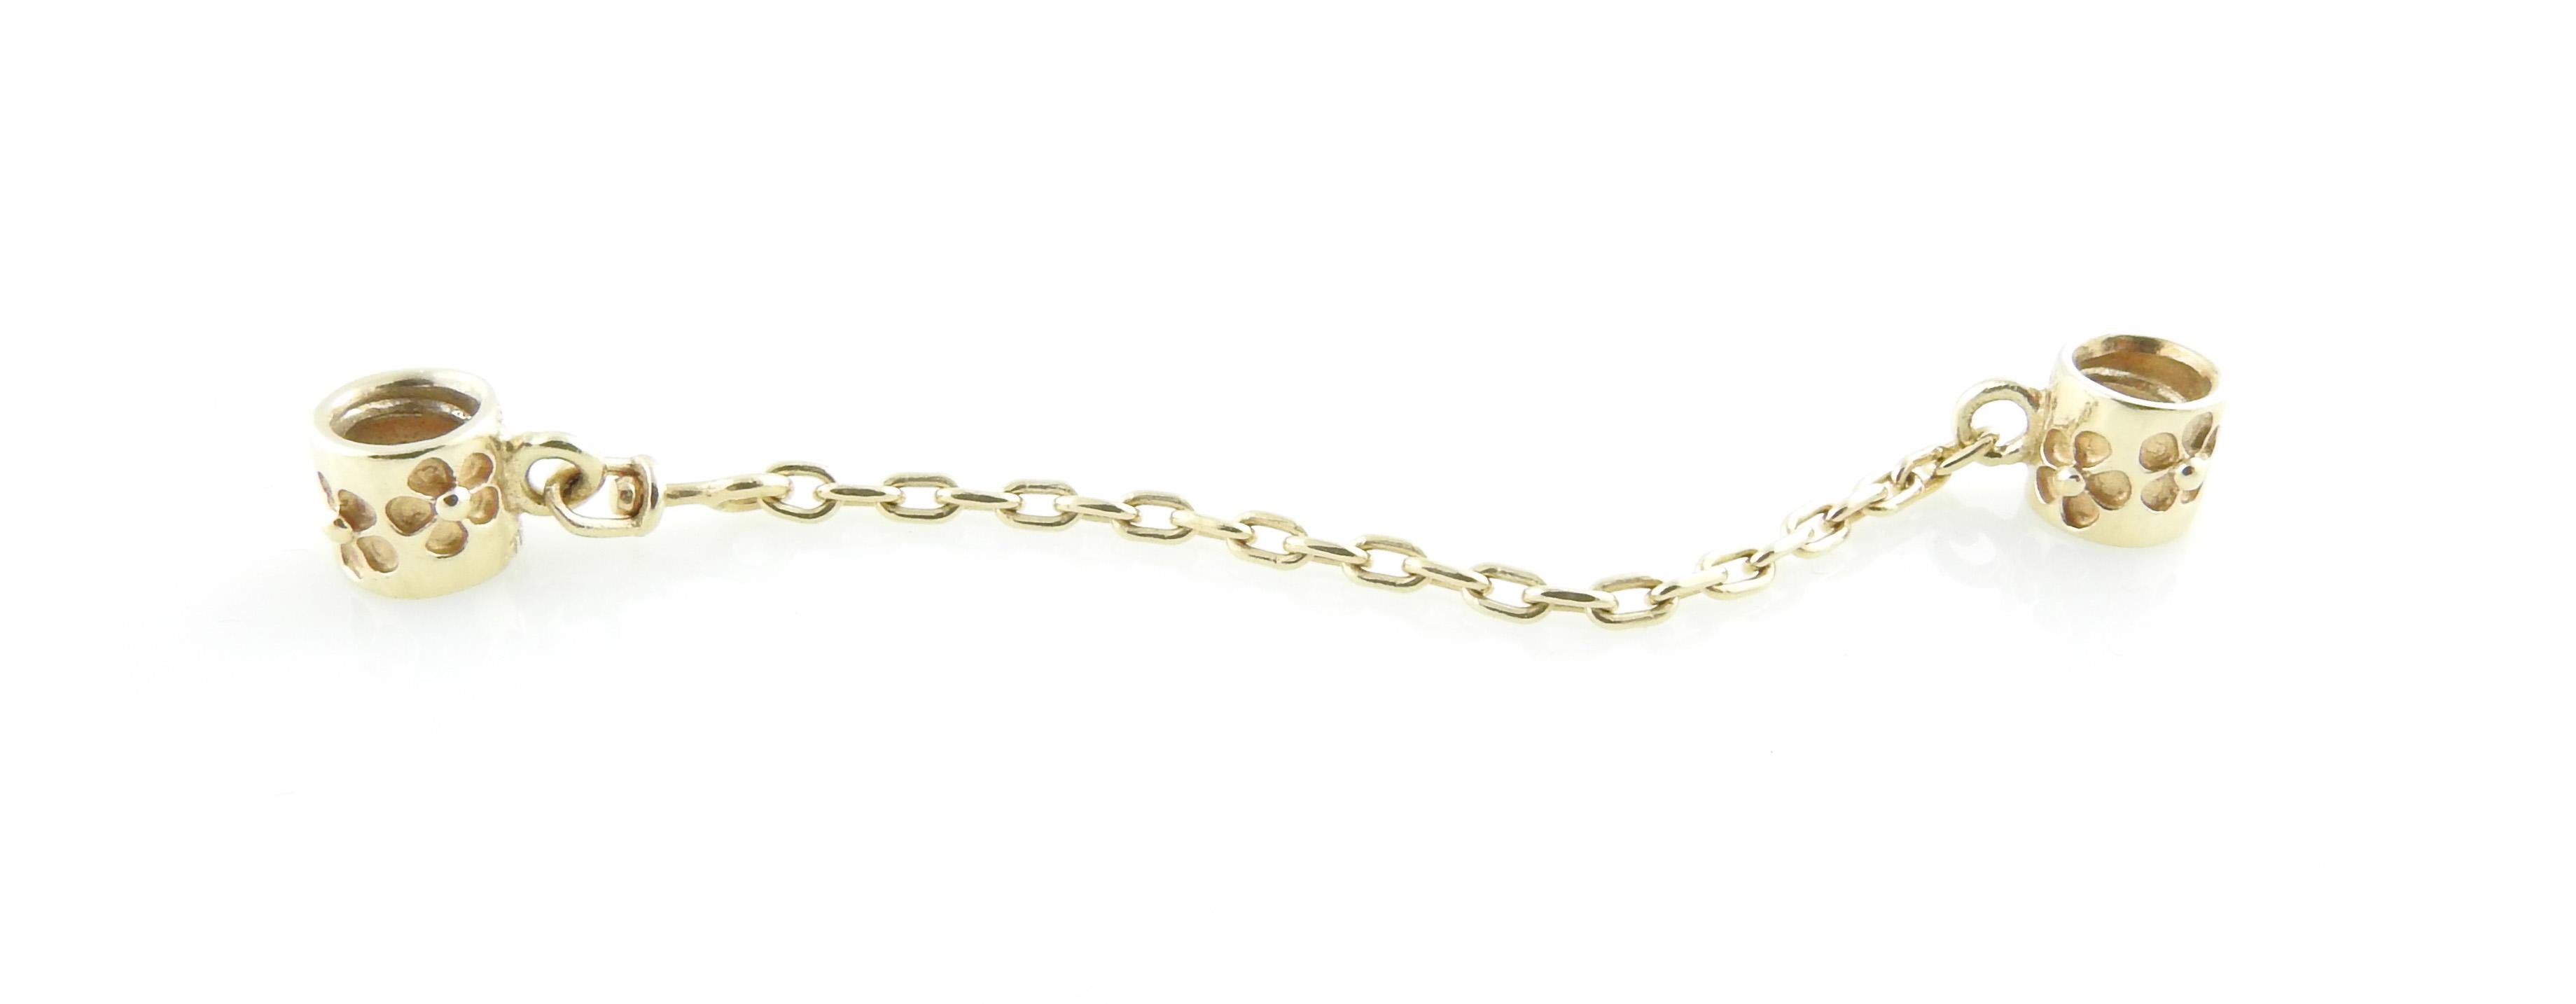 Authentic Pandora 14K Yellow Gold Flower Safety Chain

# 750312 - Retired

This beautiful Pandora 14K gold safety chain has two floral charms on each end

Approx. 2.75